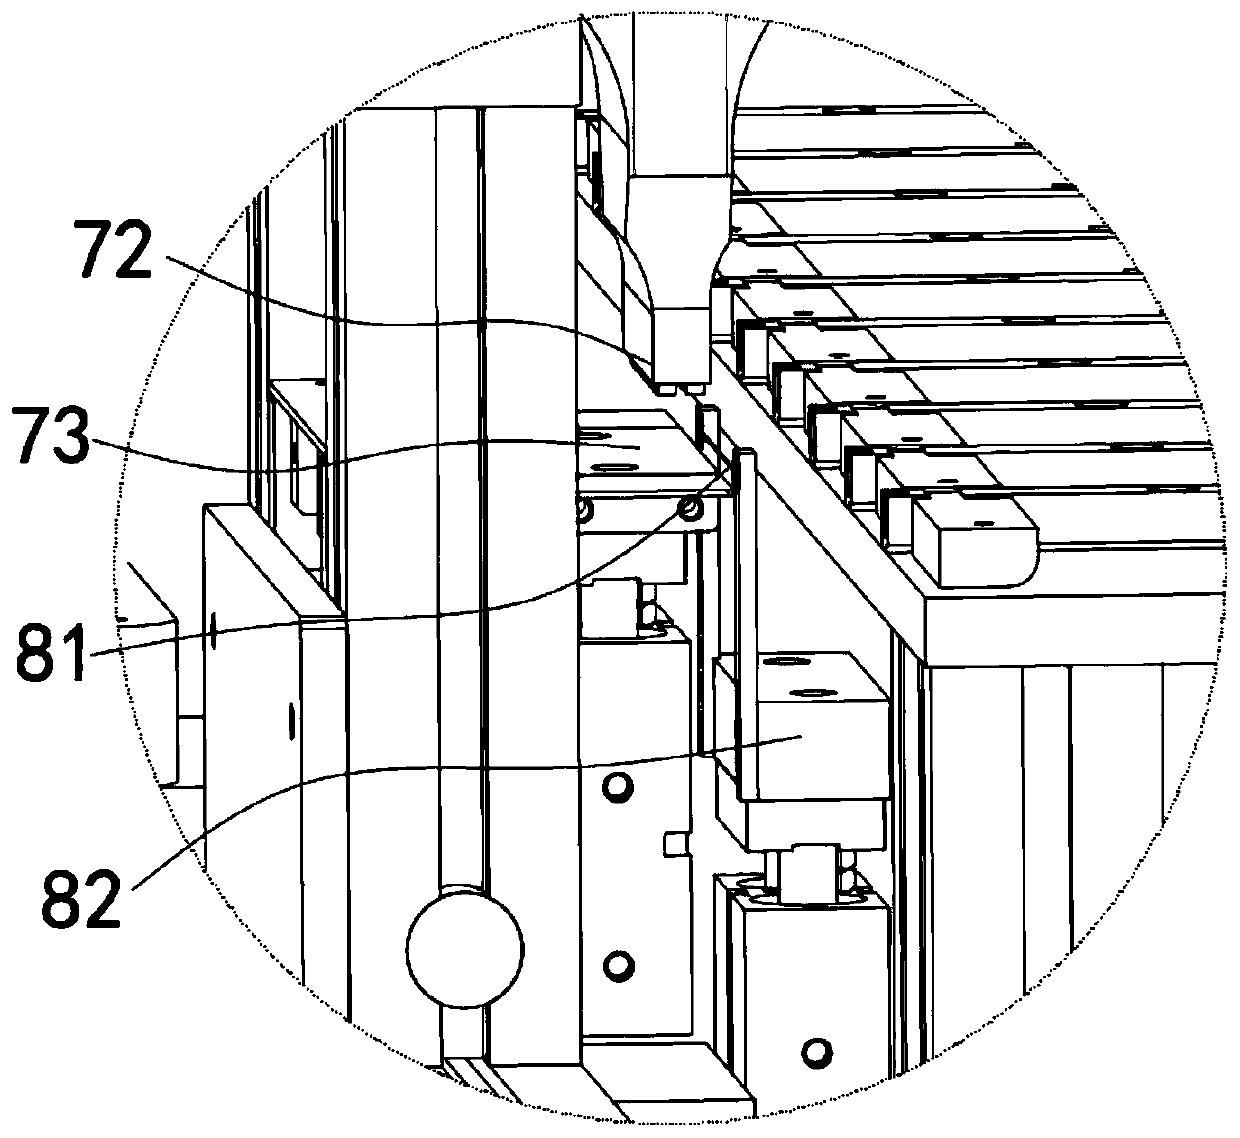 Multi-discharge-coil automatic connecting and feeding device